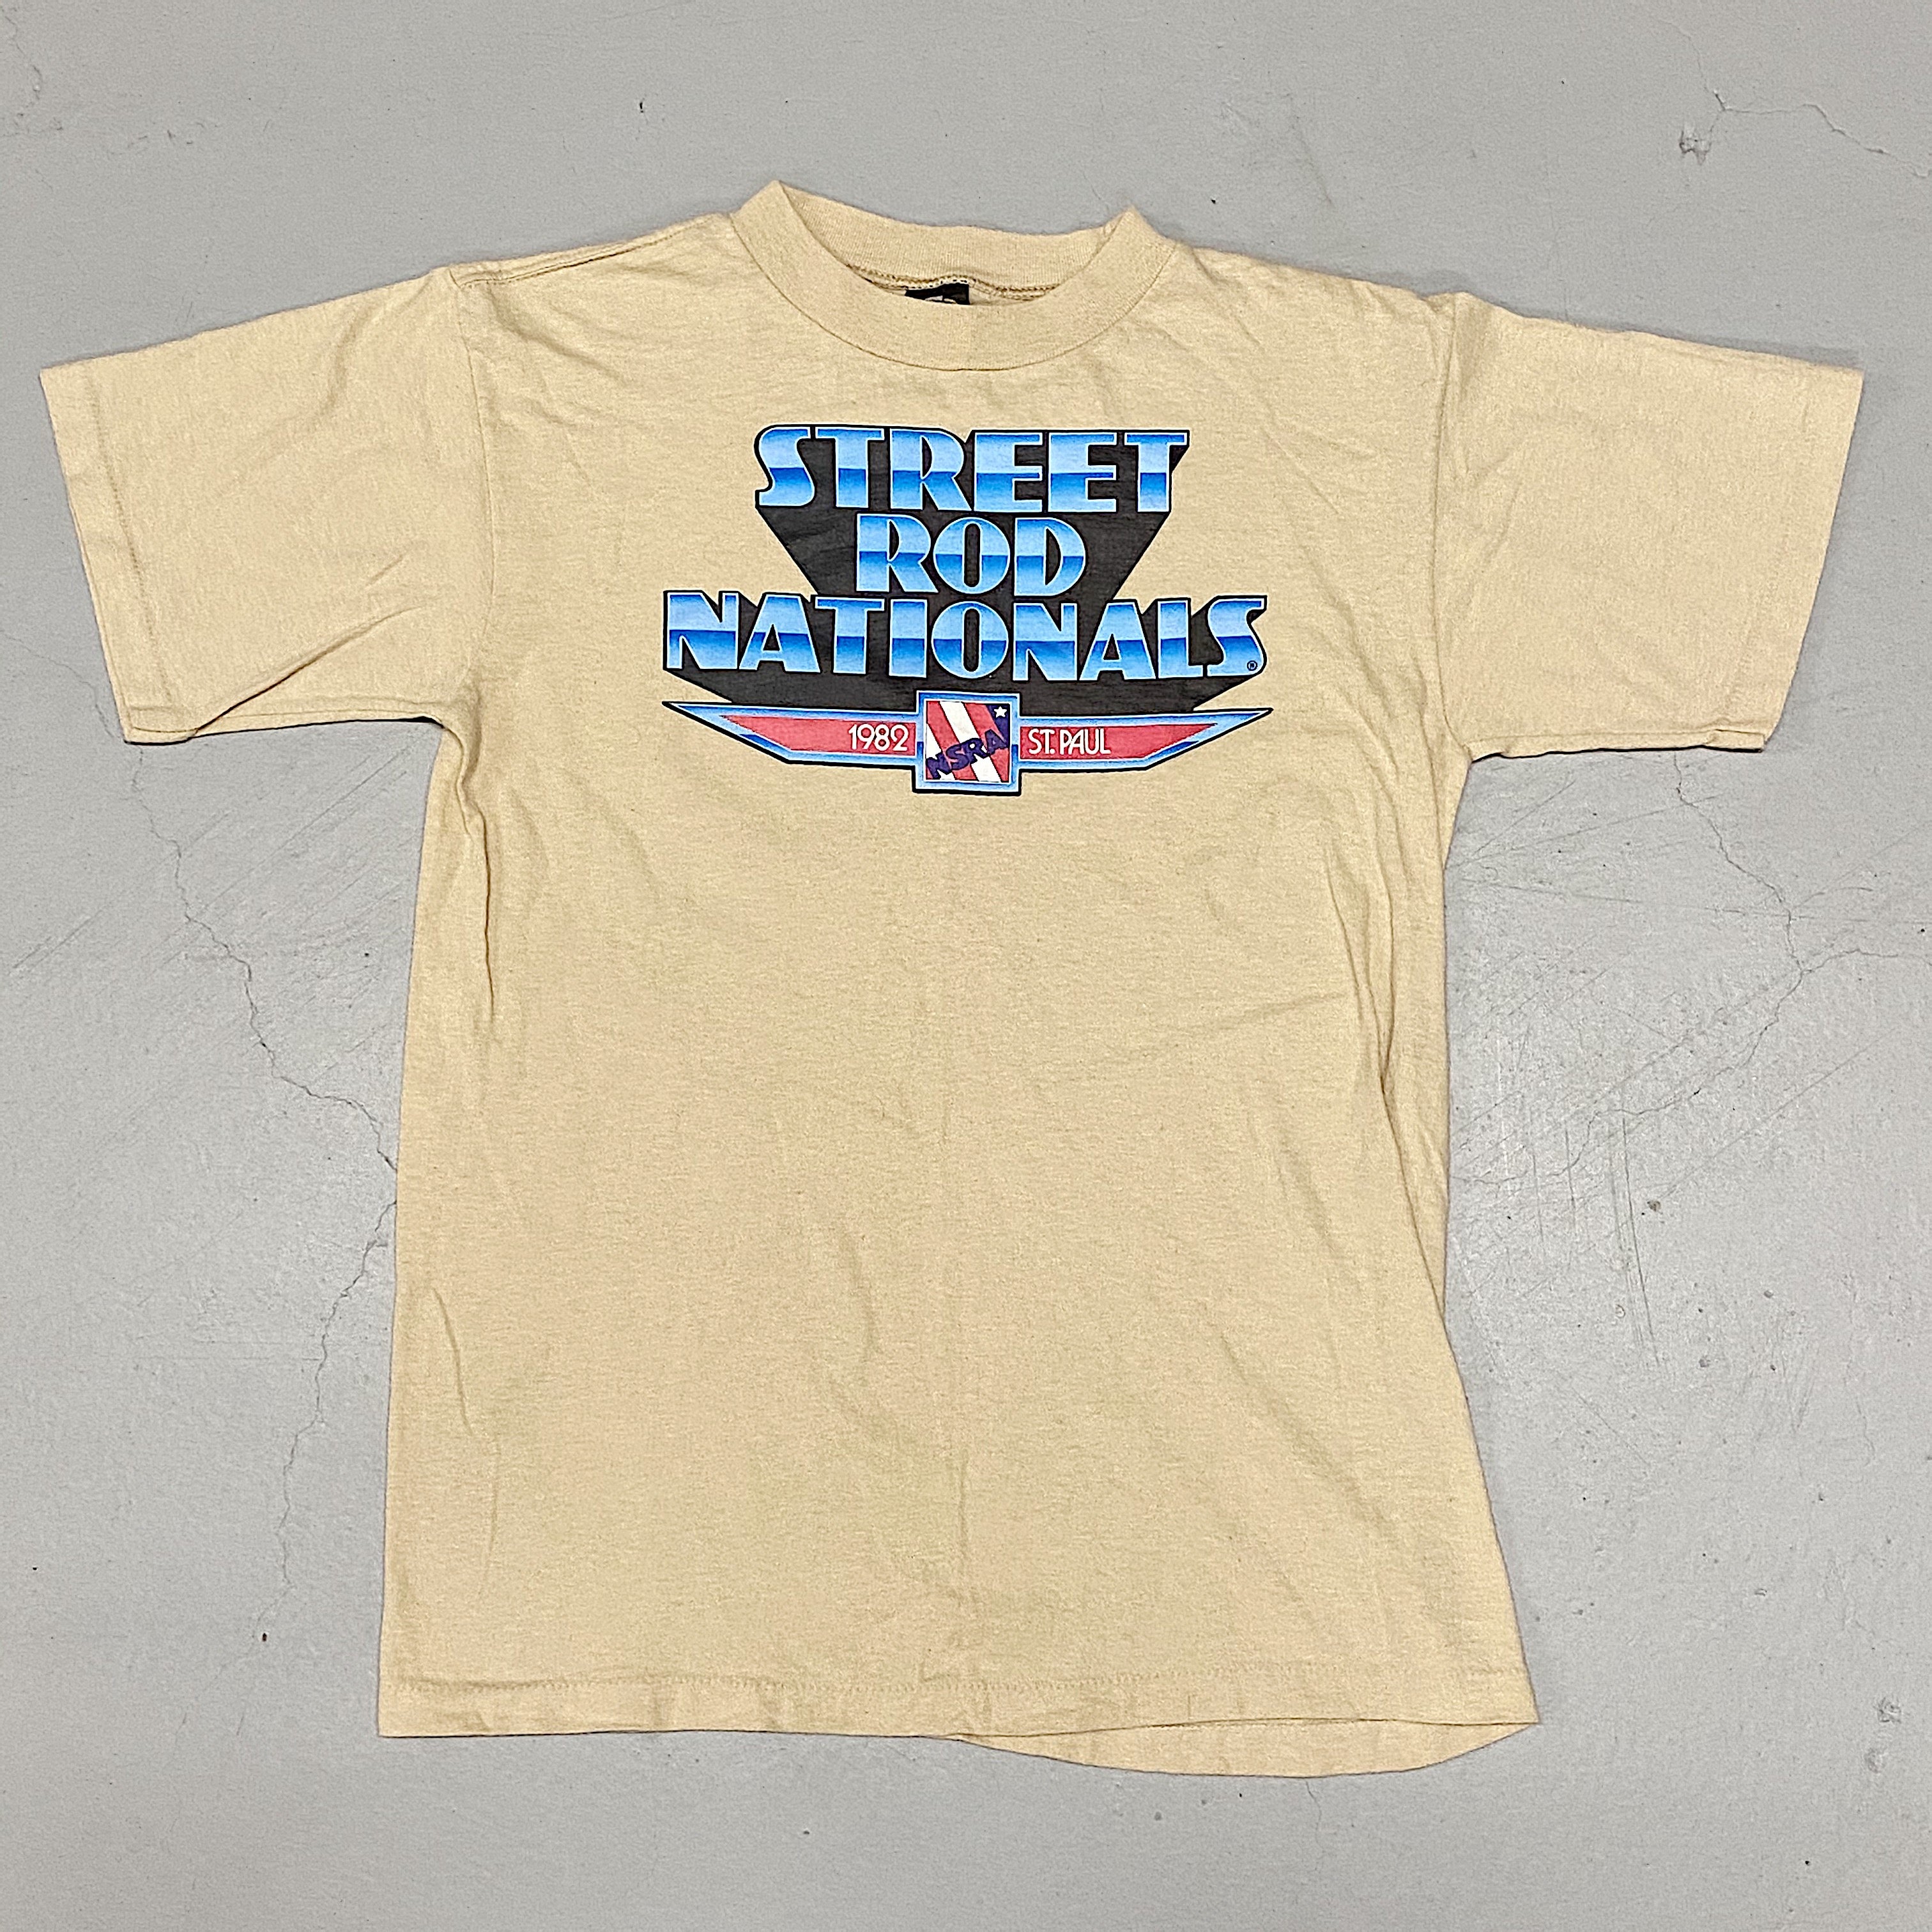 Vintage Street Rod Nationals T Shirt from 1982